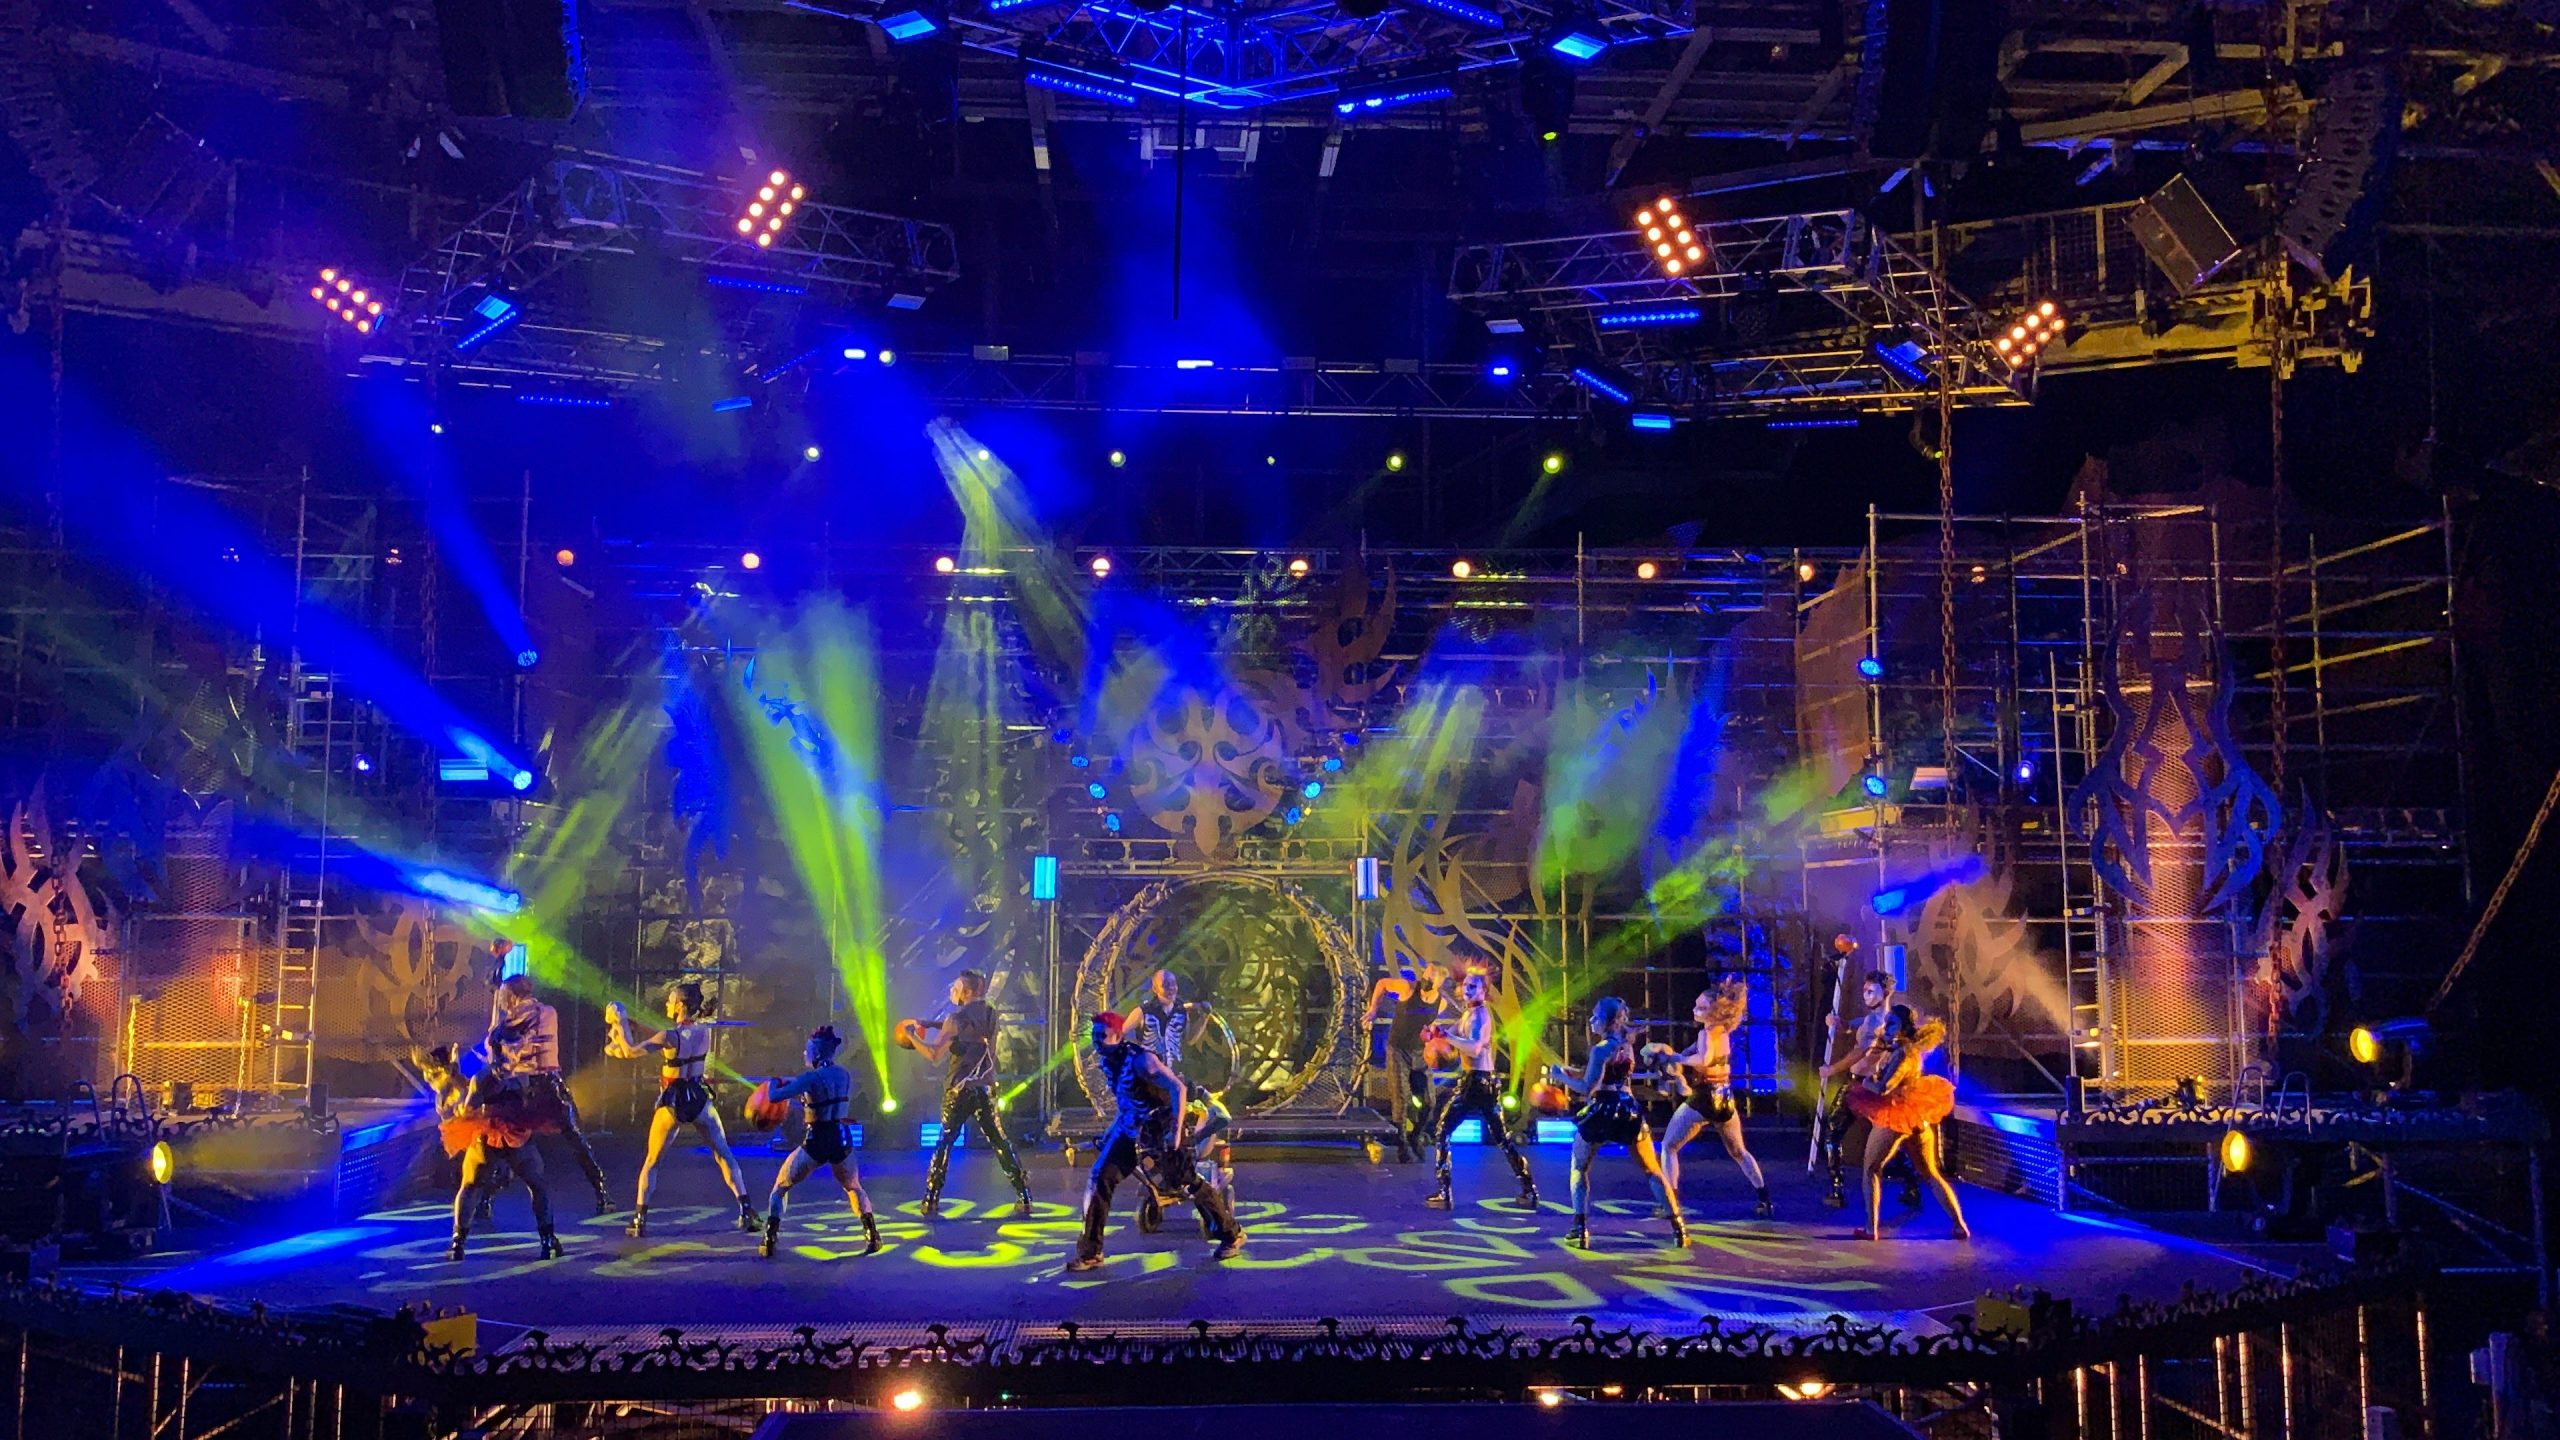 One of the live stage shows at Halloween Horror Nights.